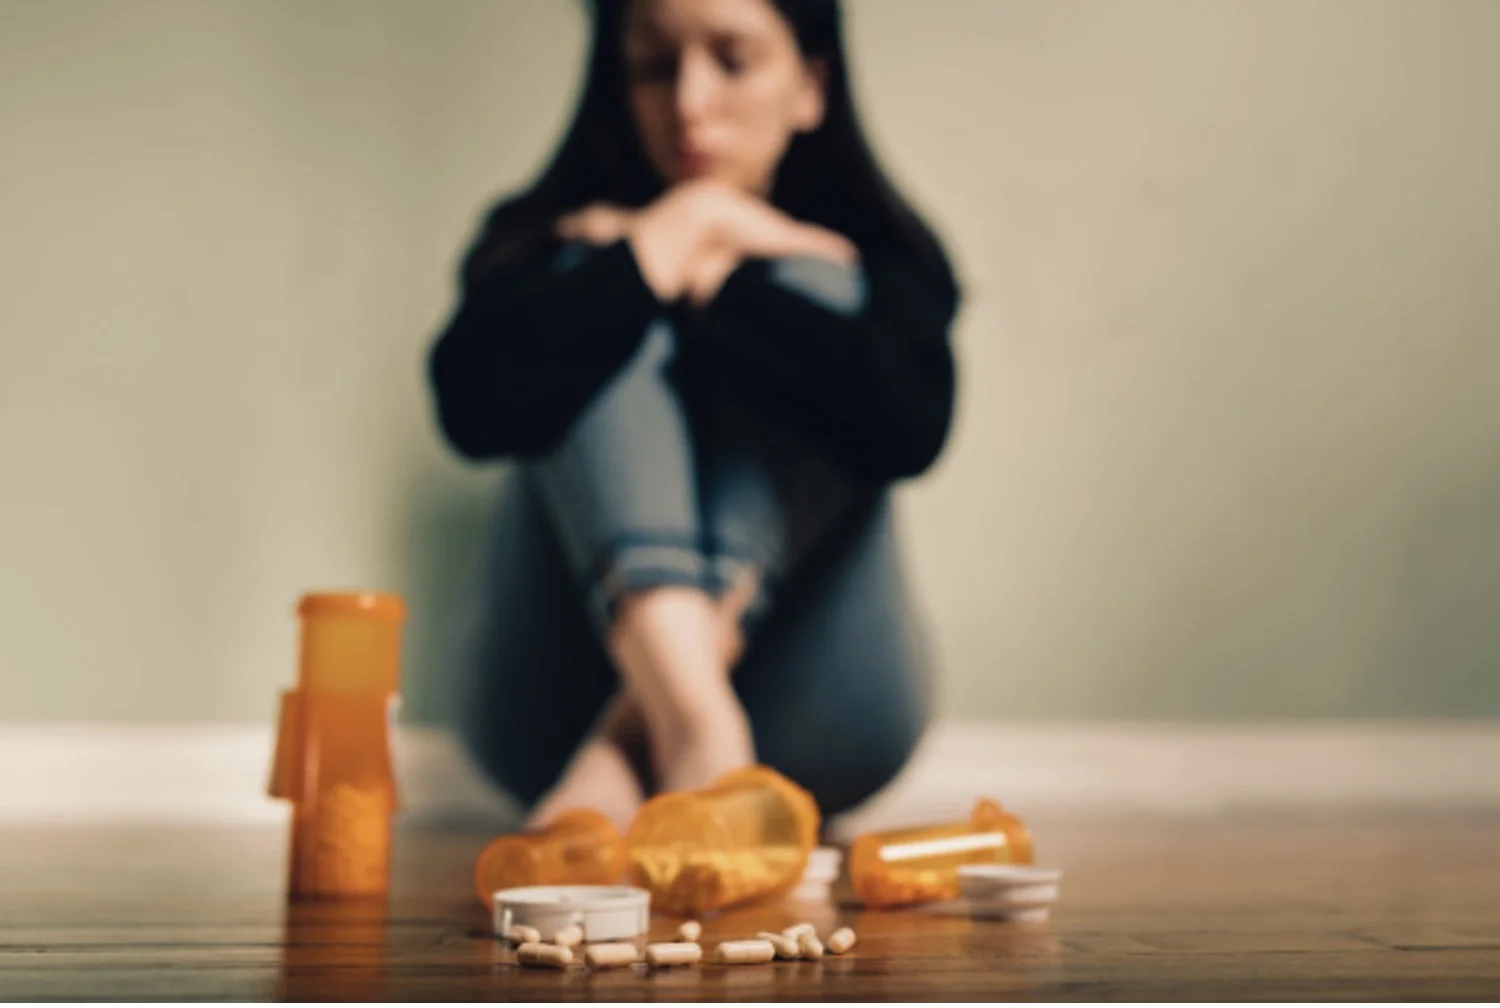 Depressed woman sits near a pile of spilled opiate pills